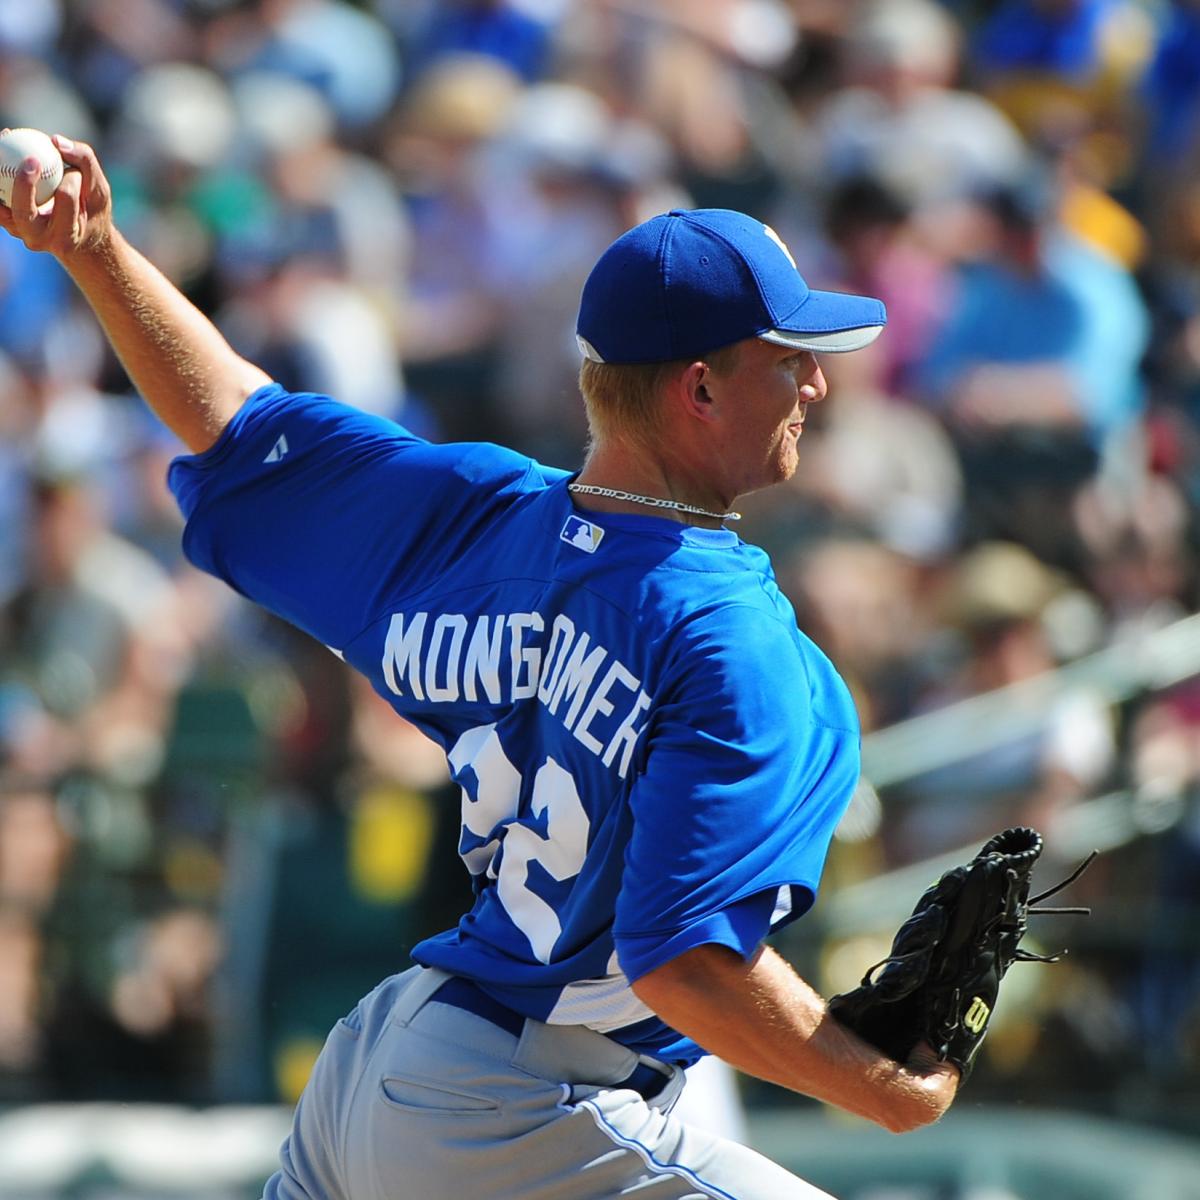 The Most Disappointing Pitching Prospects at Every Minor League Level